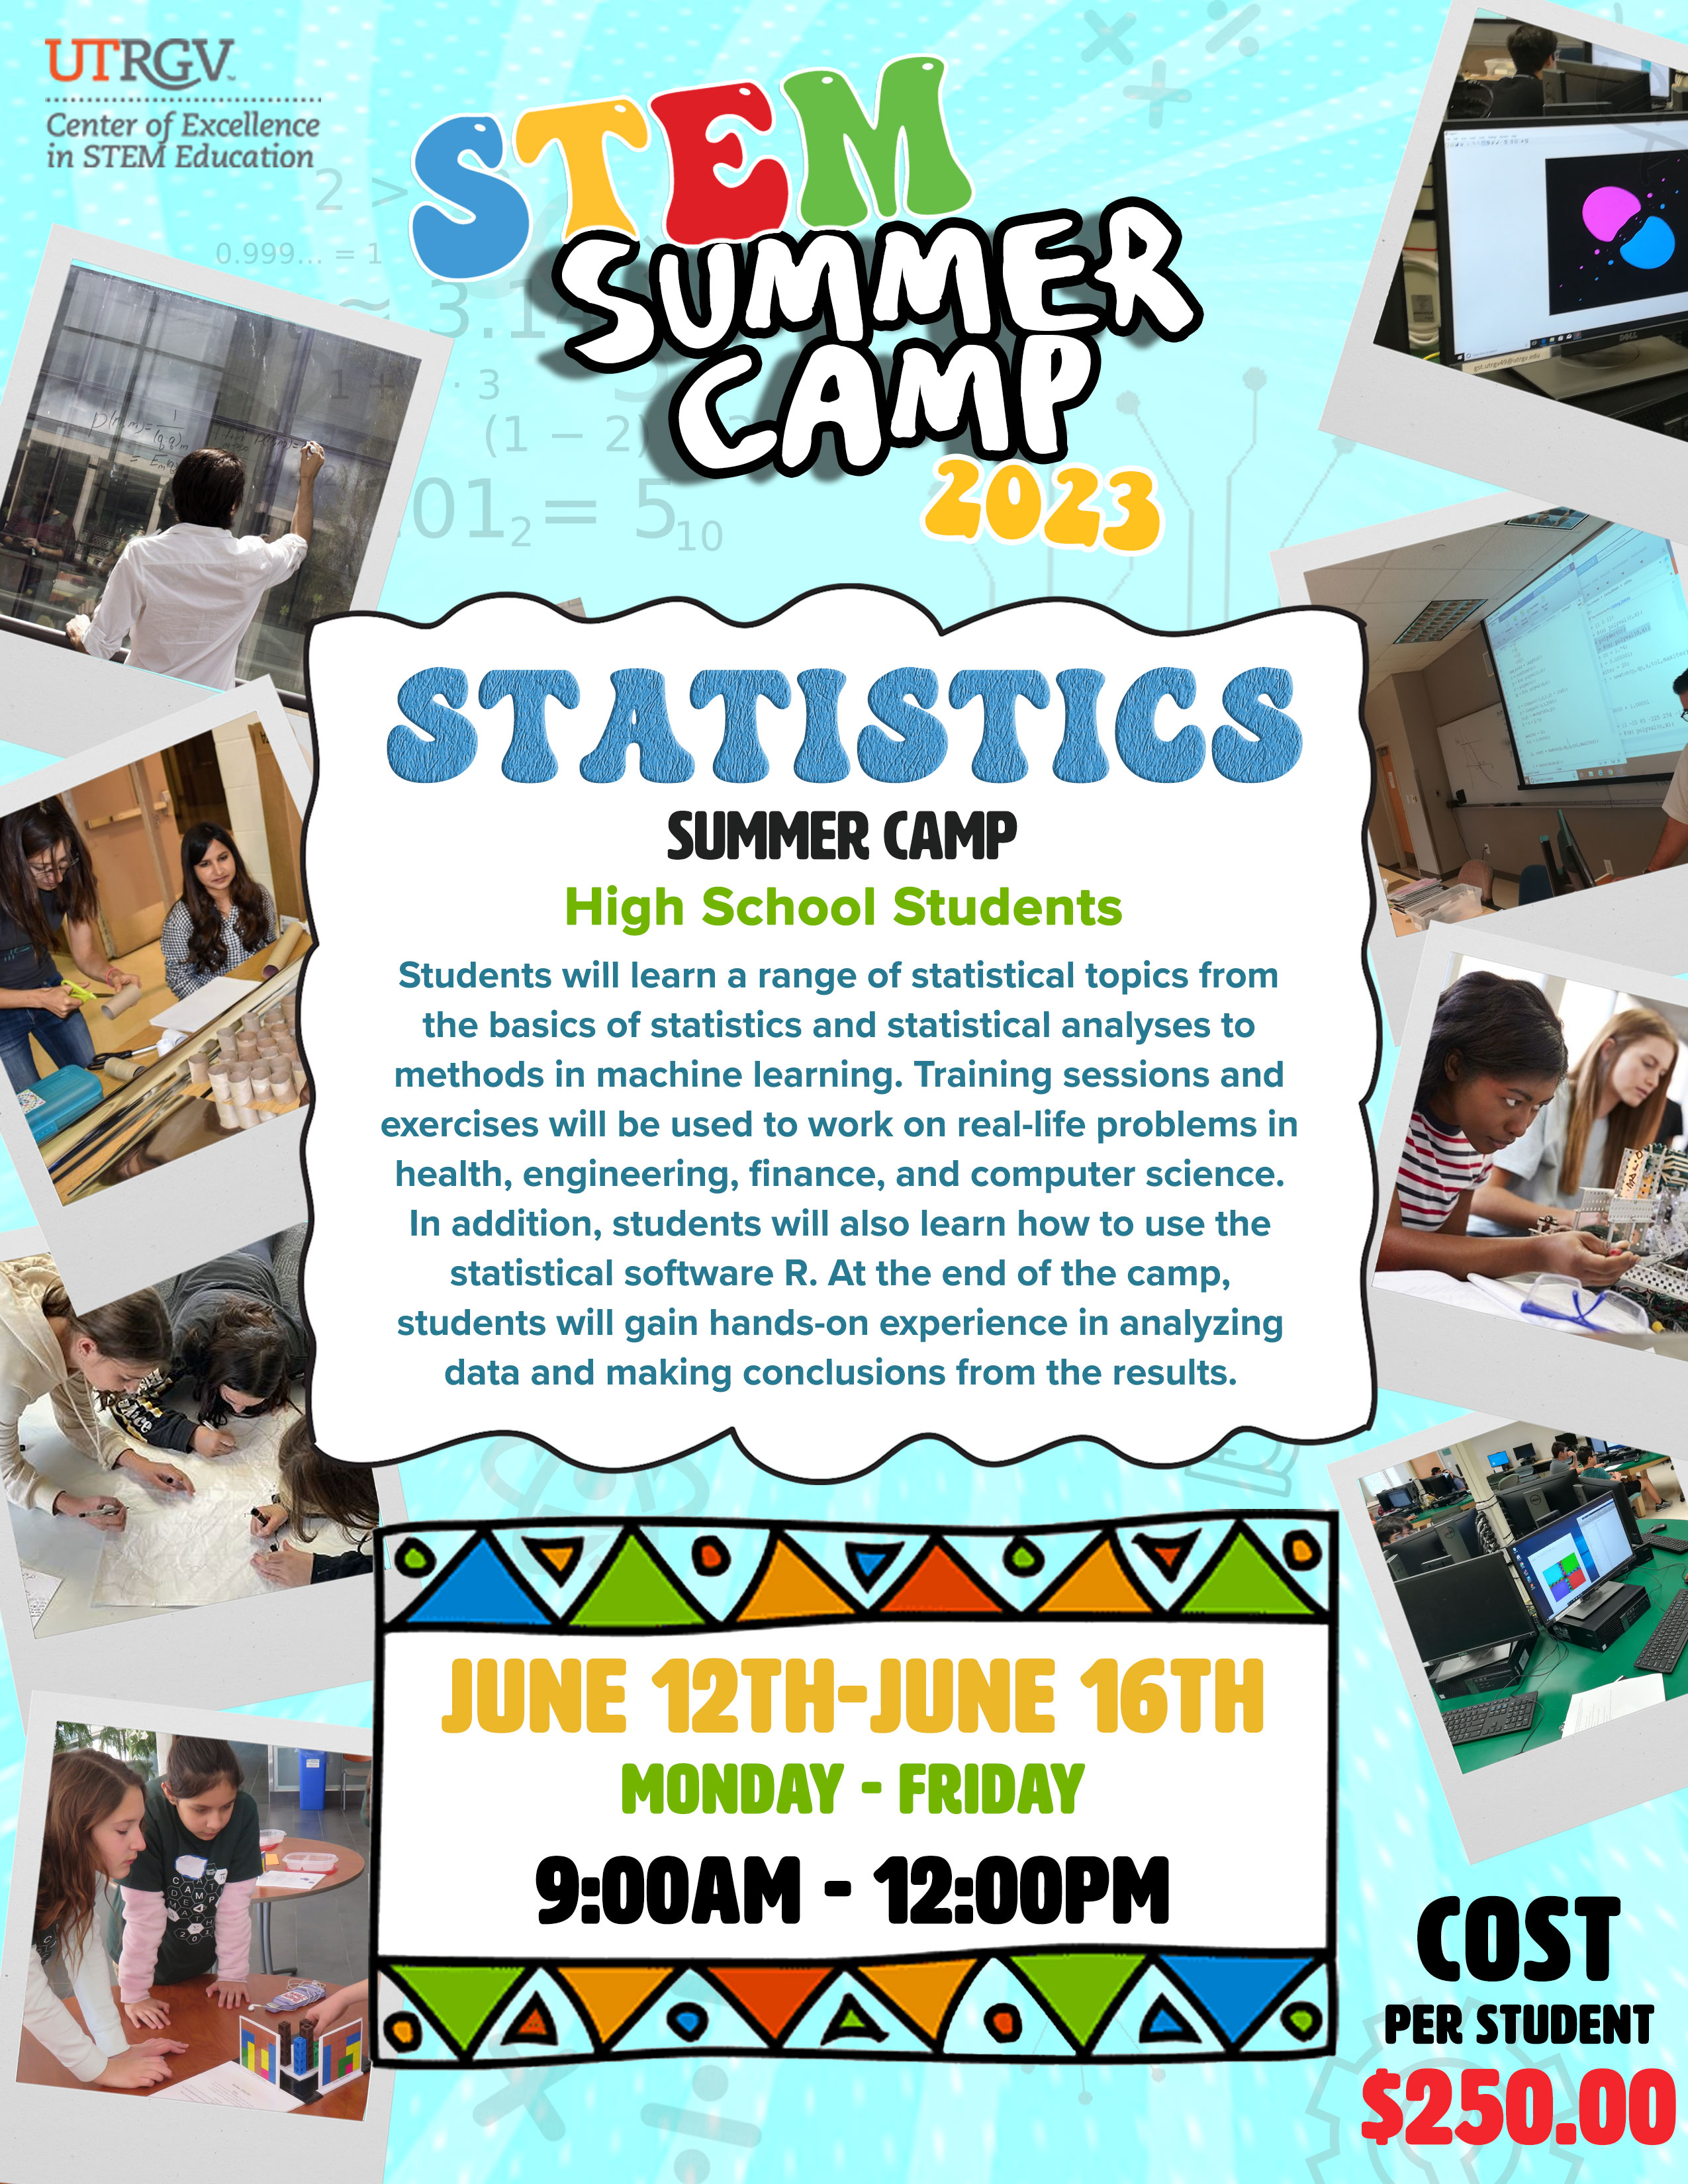 STEM Engineering Camp | $180 Register Now! | Engineering consisting of constructing and developing tools for the betterment of society. In this camp, students will be introduced to renewable sources of energy through interactive activities. | Participants will: Engage in energy challenges, implemented the steps of the Engineering Design Process, and Design, build, and test their own models. June 10-14th: Week 1: Morning Session - 6th to 8th grade. Afternoon Session - High school (9th-12th) | Morning Session: 9:00 a.m - 12:00 p.m. Afternoon Session: 1:00 p.m. - 4:00 p.m. Session hours apply to all camps